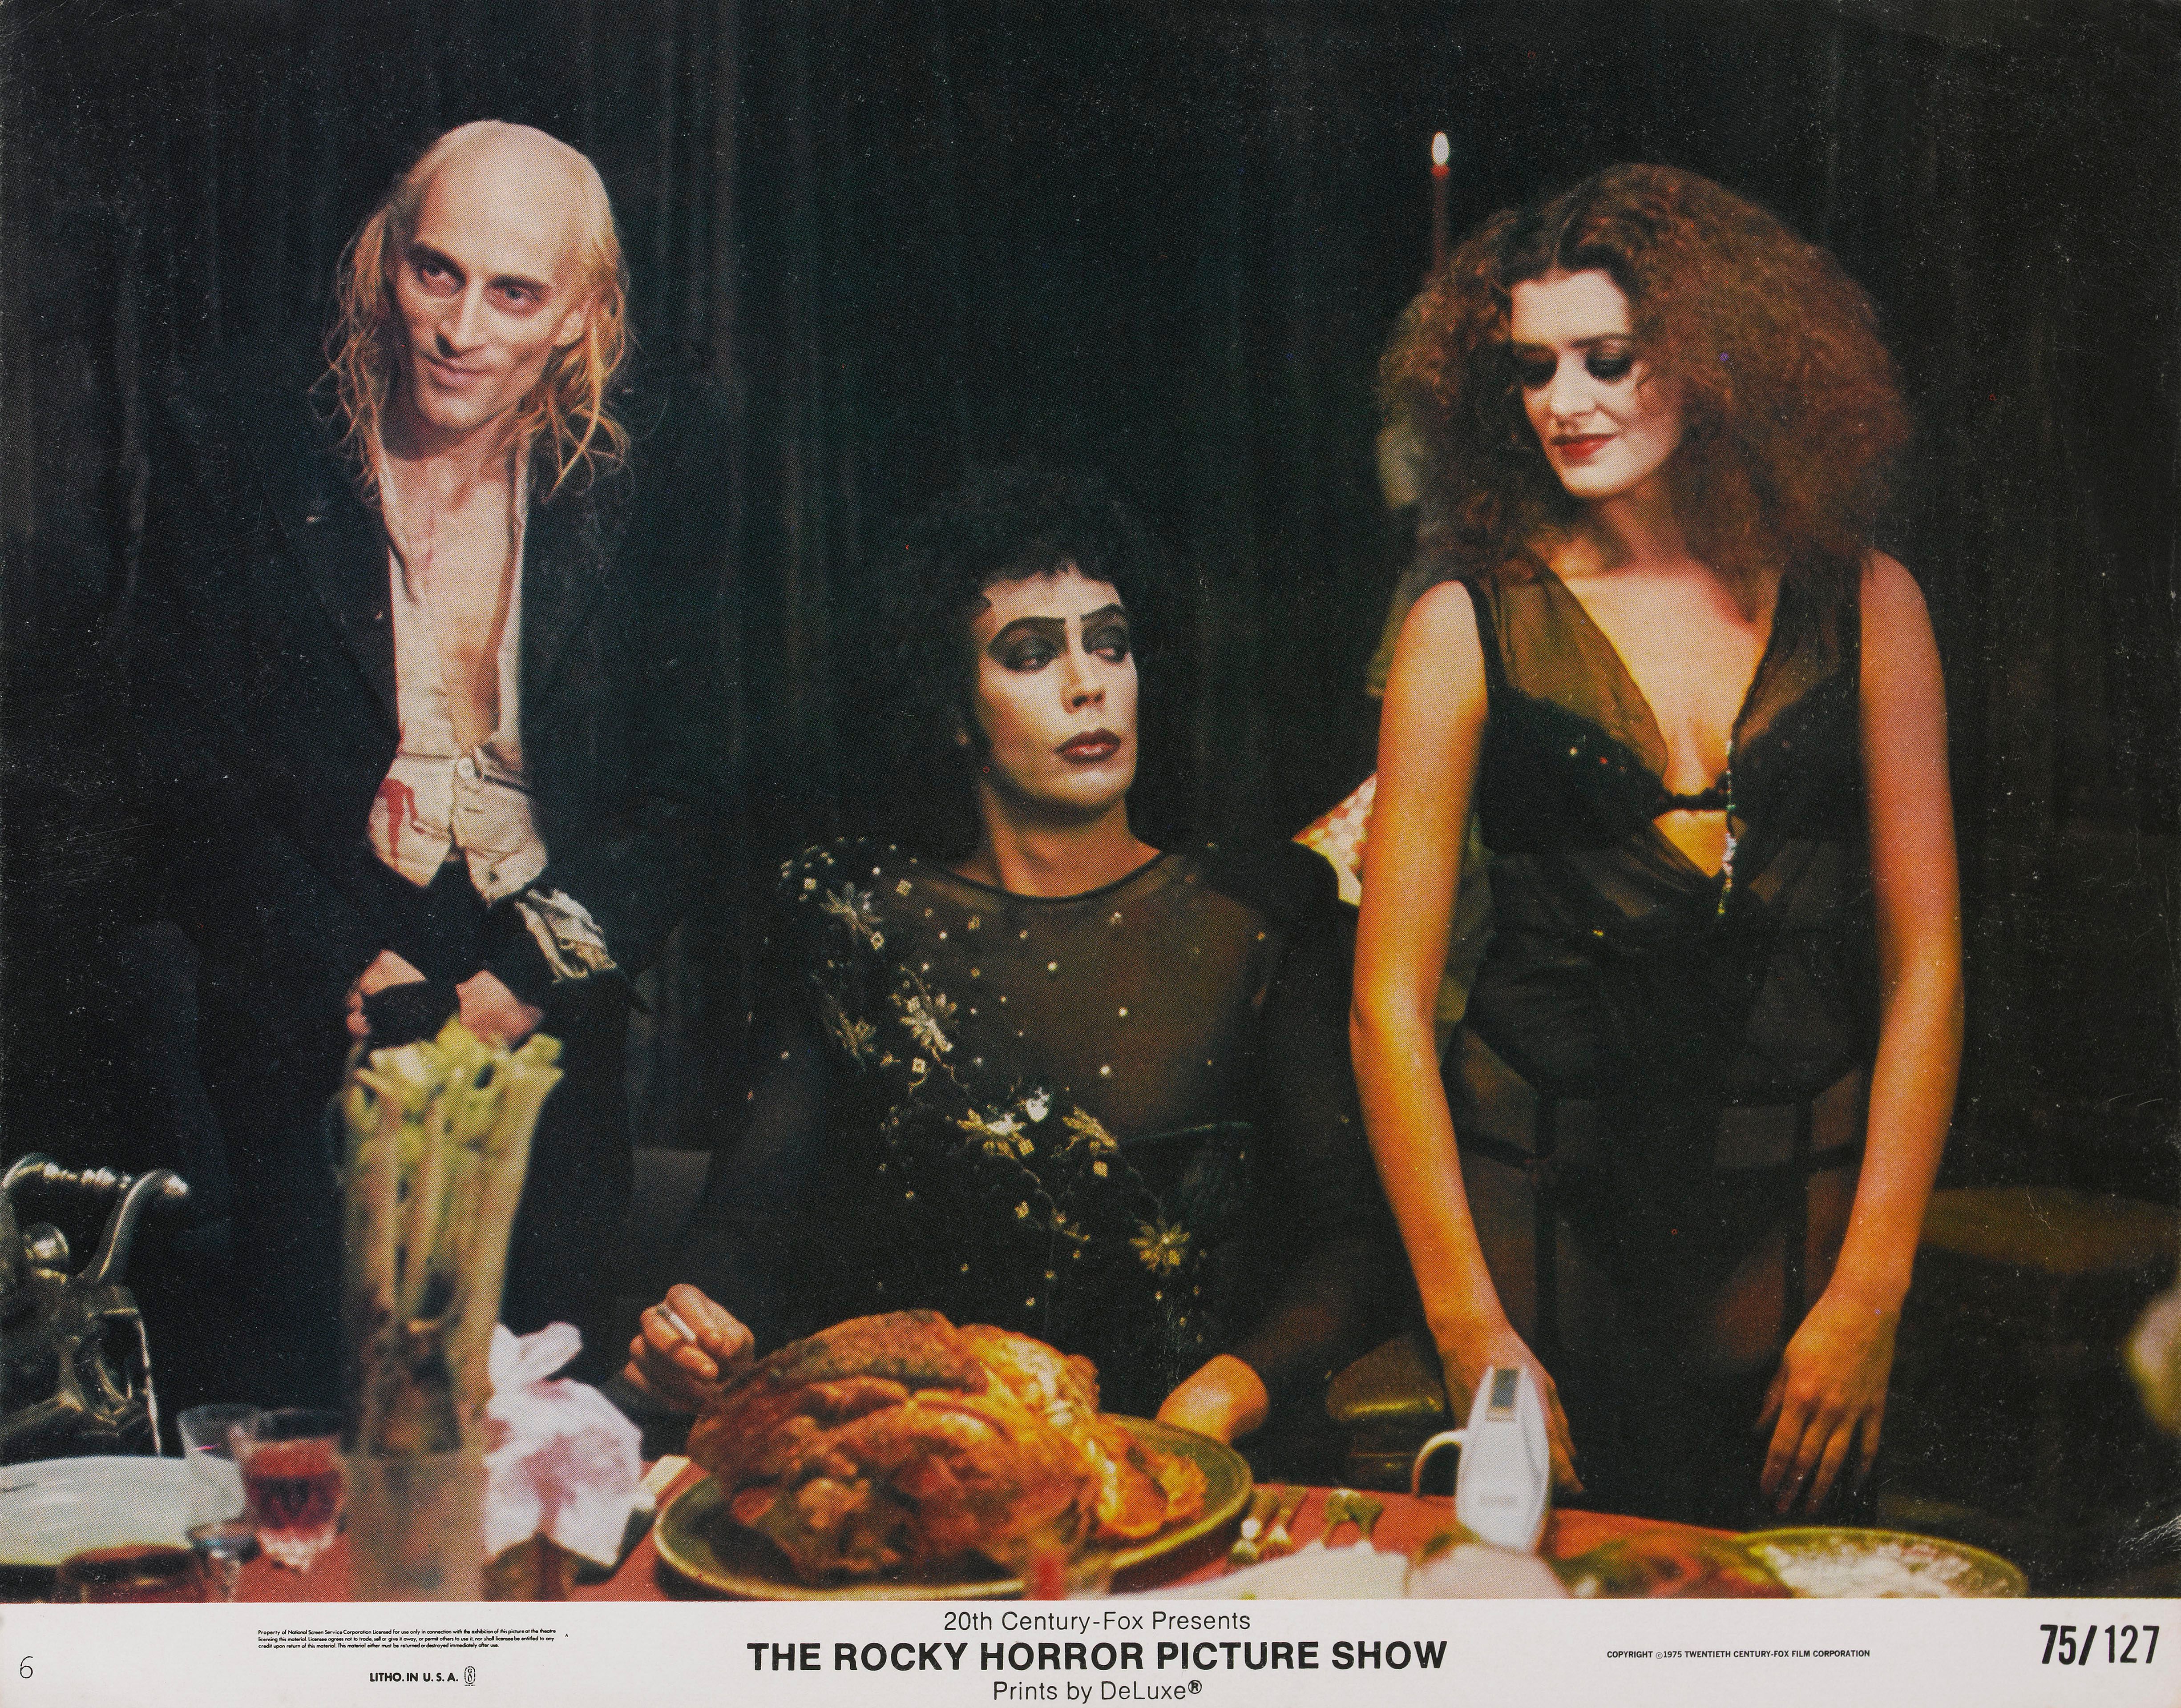 Richard O'Brien, Tim Curry and Patricia Quinn in 1975 in the 'The Rocky Horror Picture Show' | Source: Getty Images